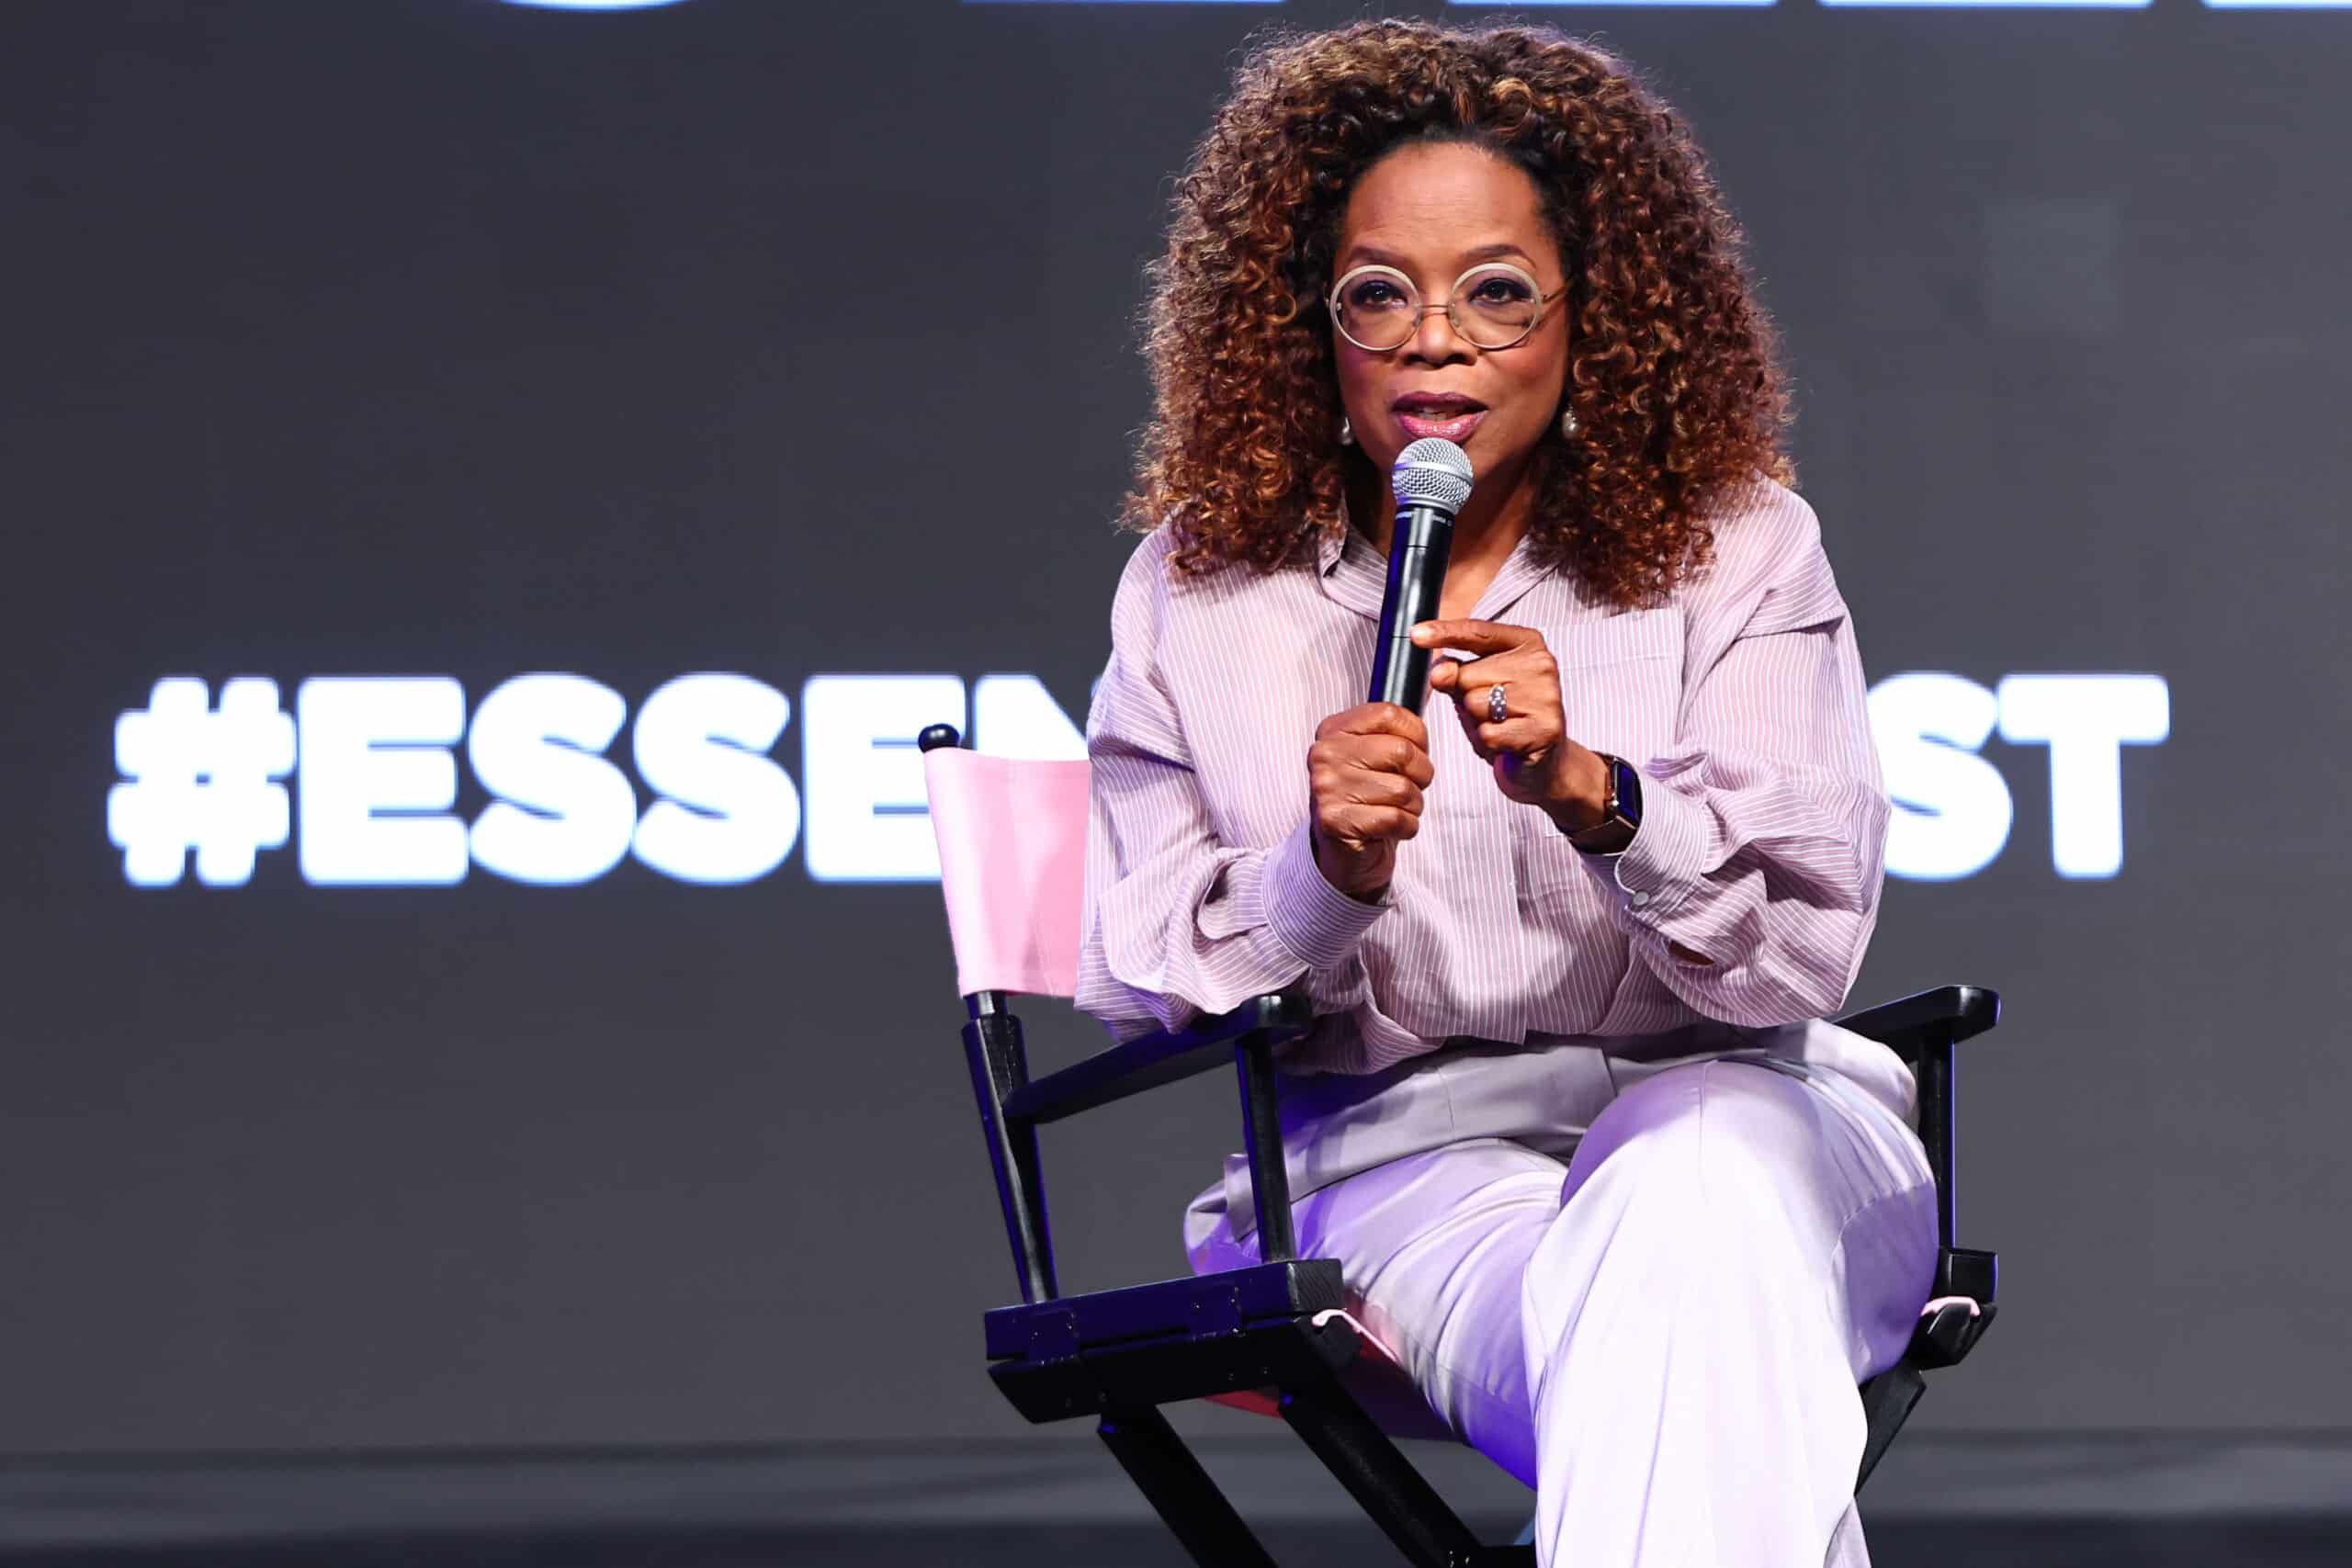 Oprah Winfrey Admits to Being 'Shocked' Over Maui Backlash